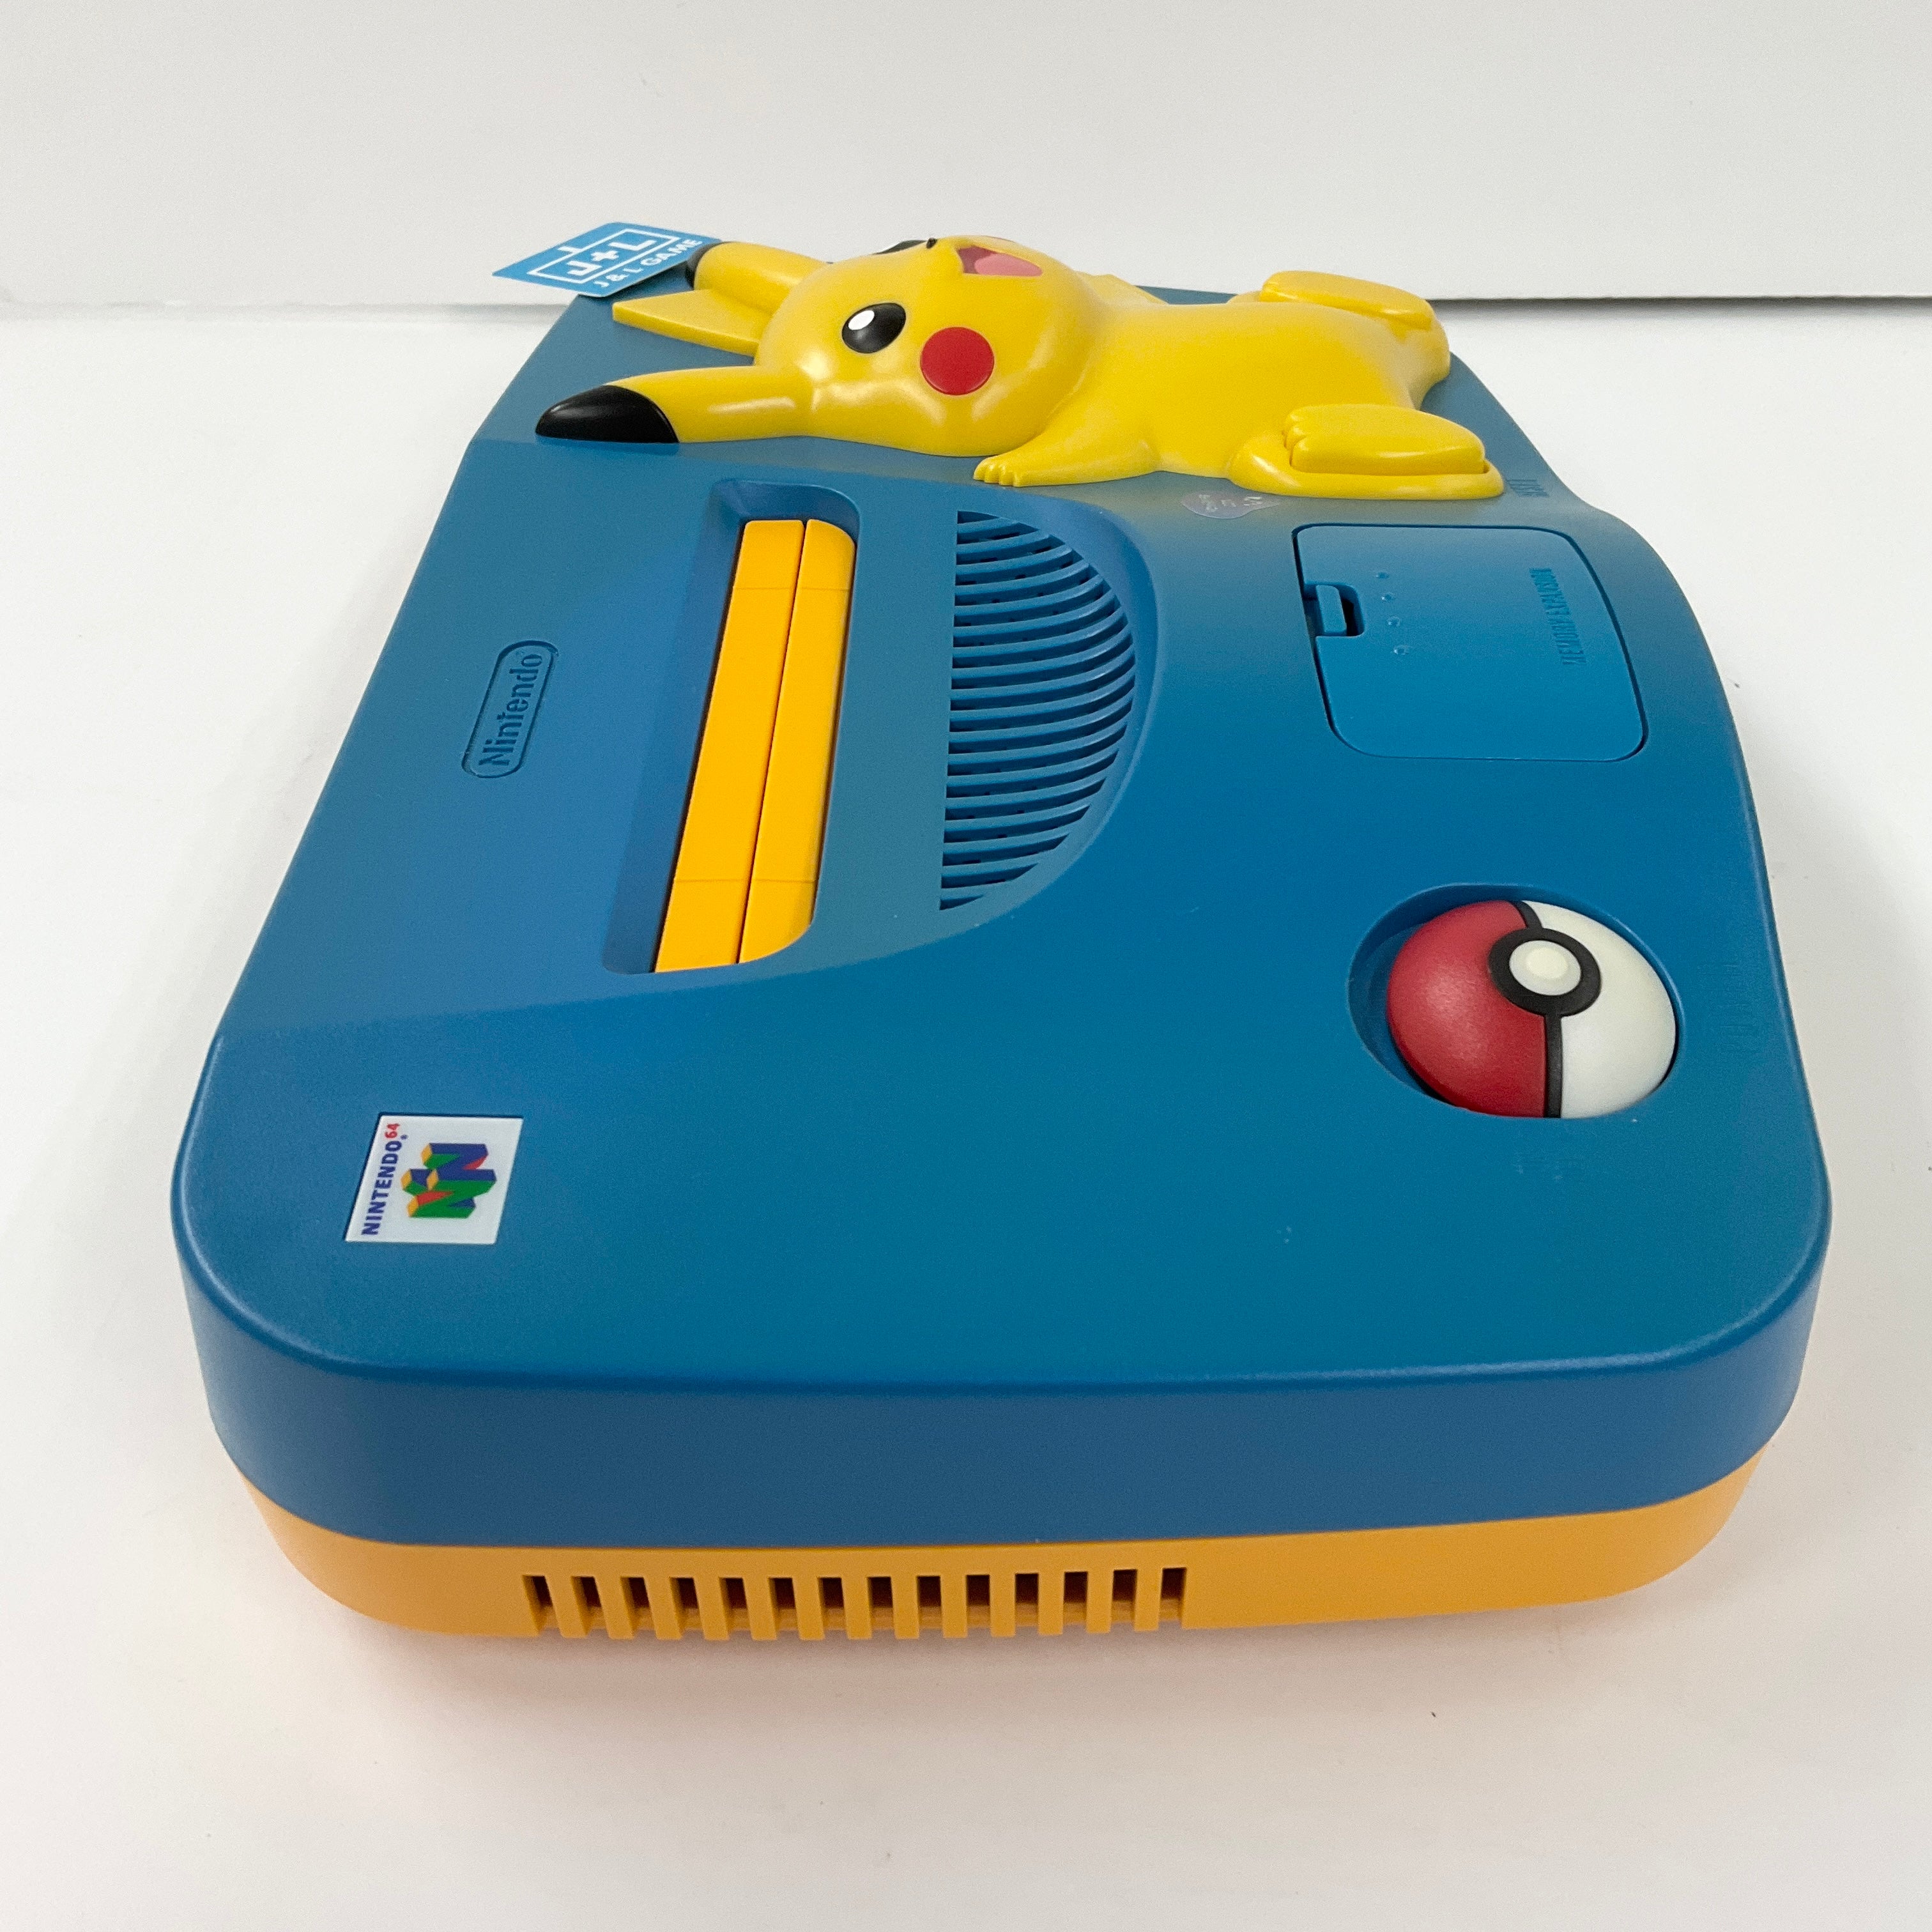 Nintendo 64 Hardware Console (Pikachu Edition) (Blue and Yellow) - (N64) Nintendo 64 [Pre-Owned] (Japanese Import) CONSOLE Nintendo   